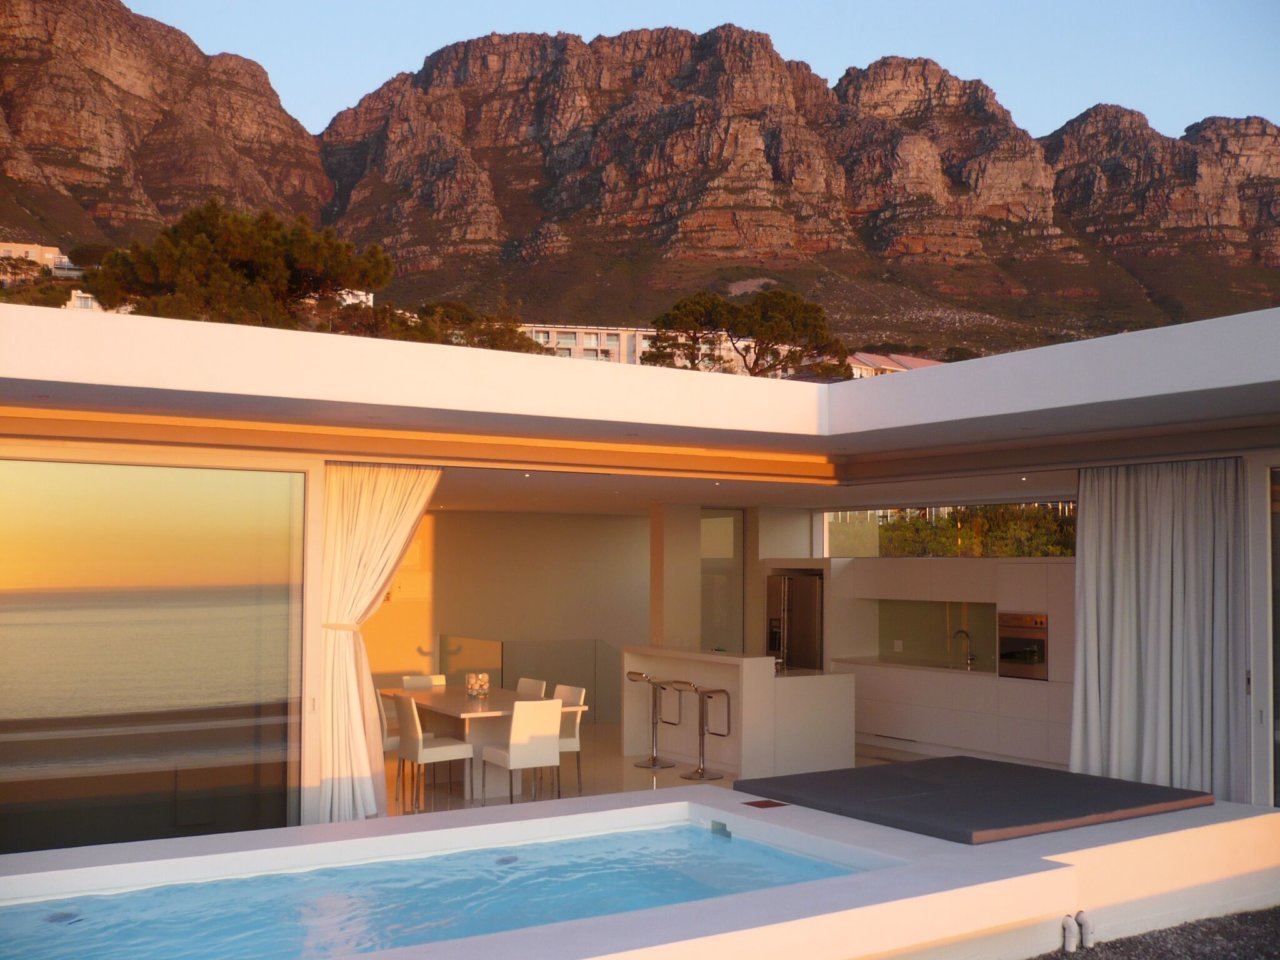 Photo 32 of Aqua Villa accommodation in Camps Bay, Cape Town with 5 bedrooms and 5 bathrooms